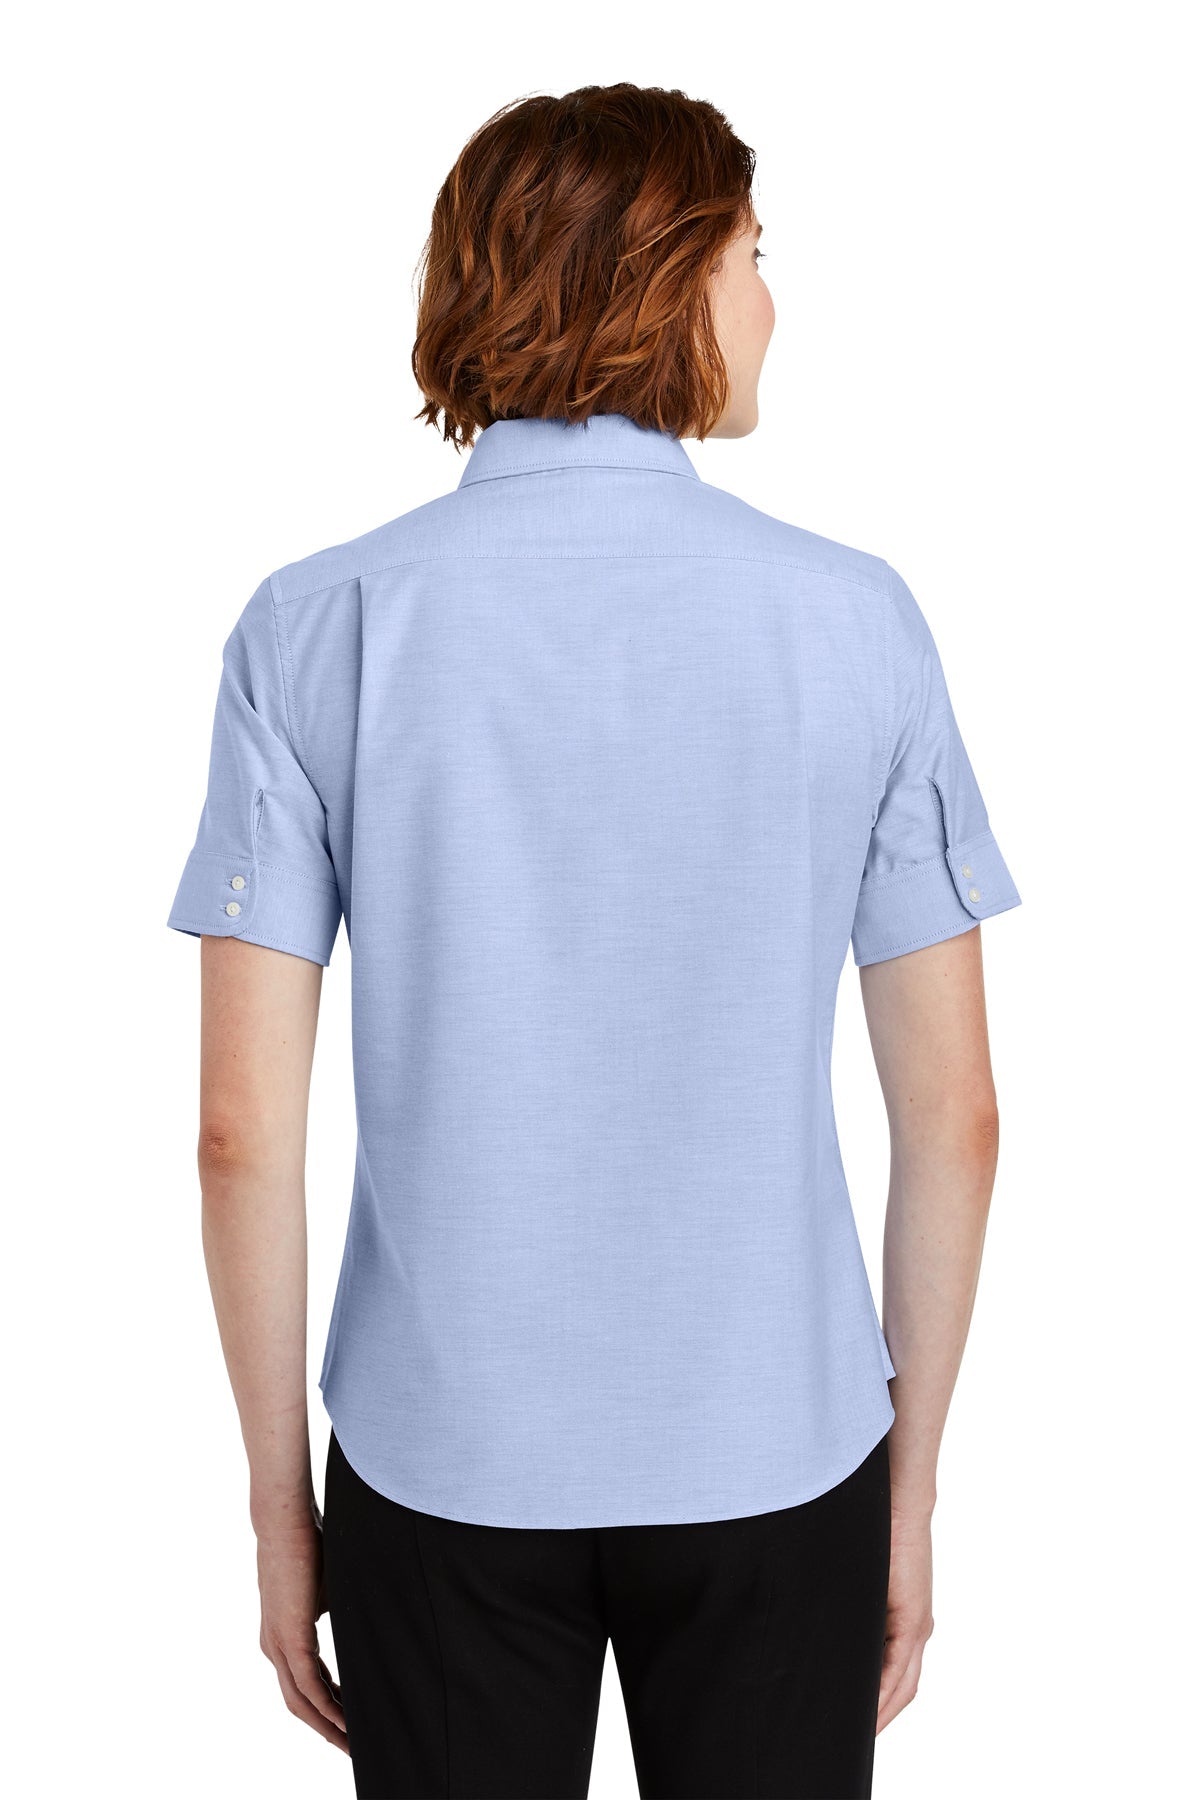 port authority_l659 _oxford blue_company_logo_button downs